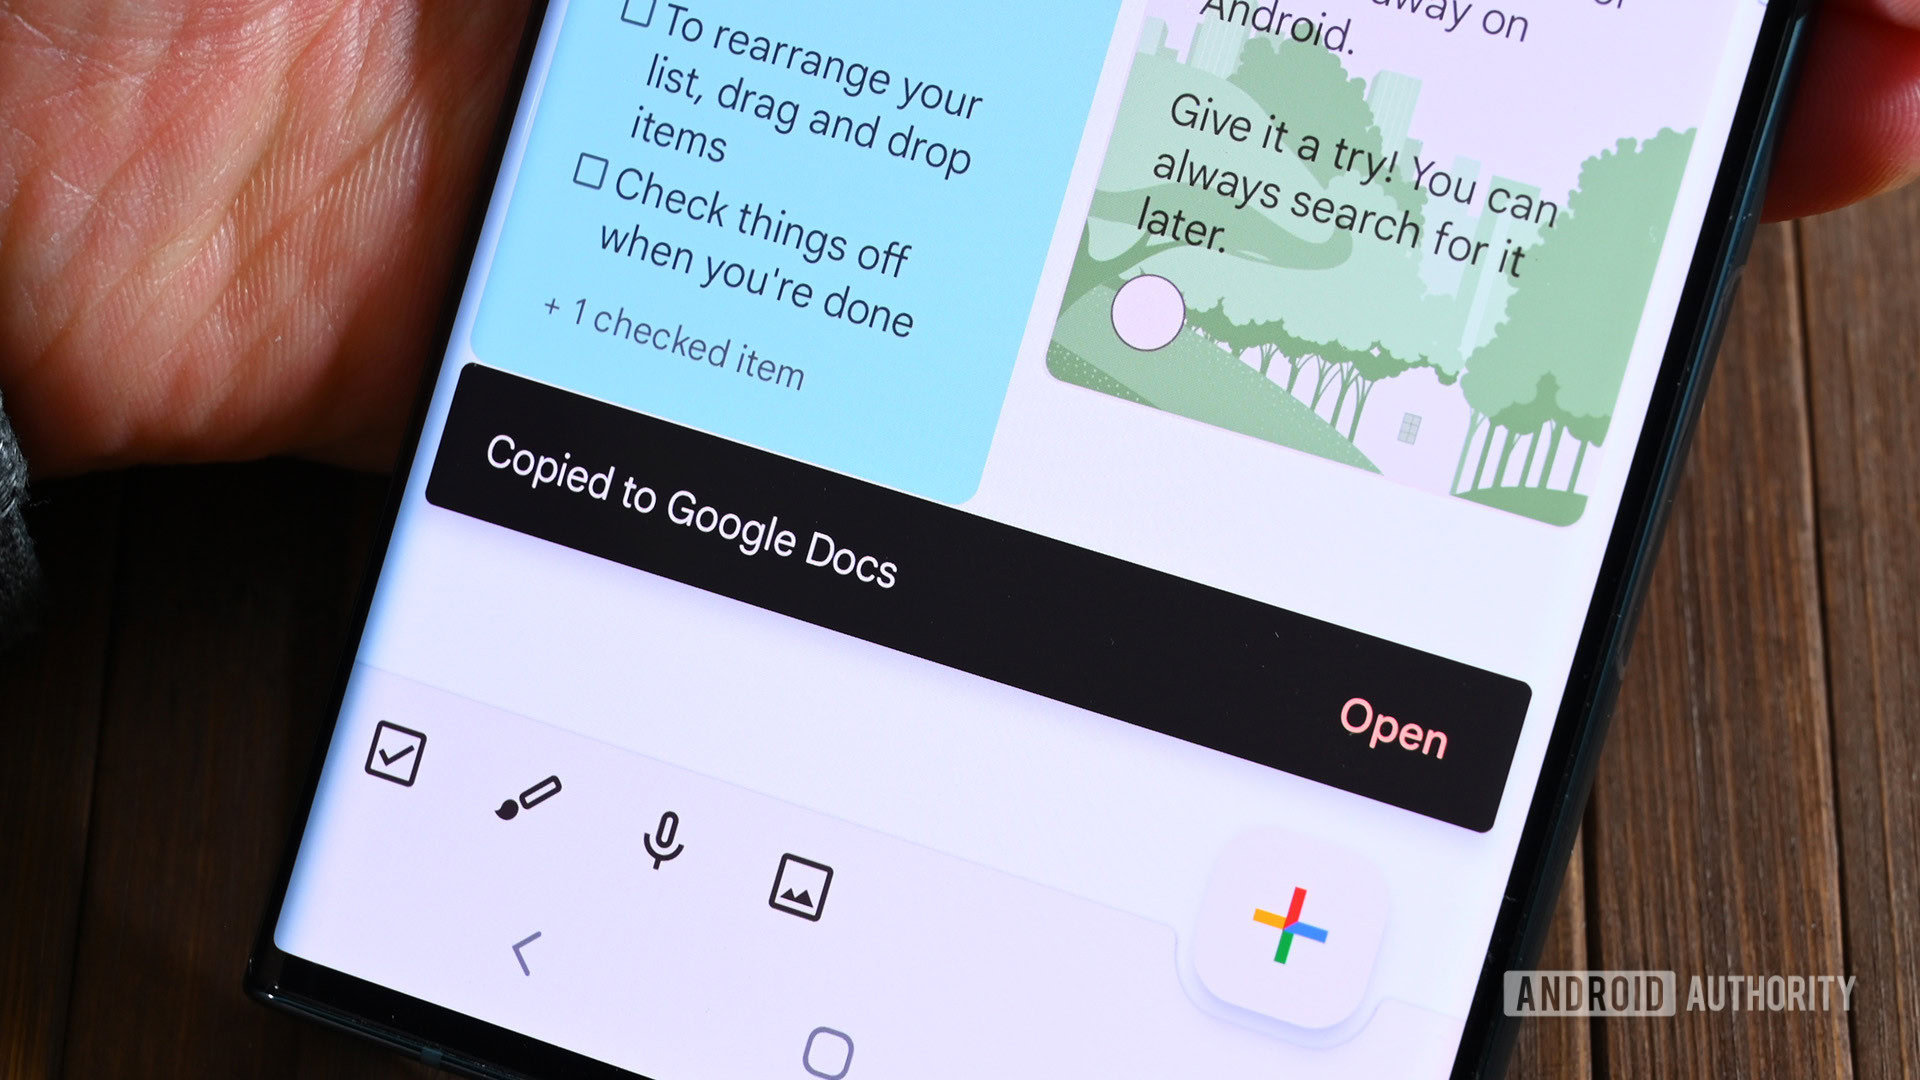 https://www.androidauthority.com/wp-content/uploads/2022/04/Google-Keep-copied-to-Google-Drive.jpg